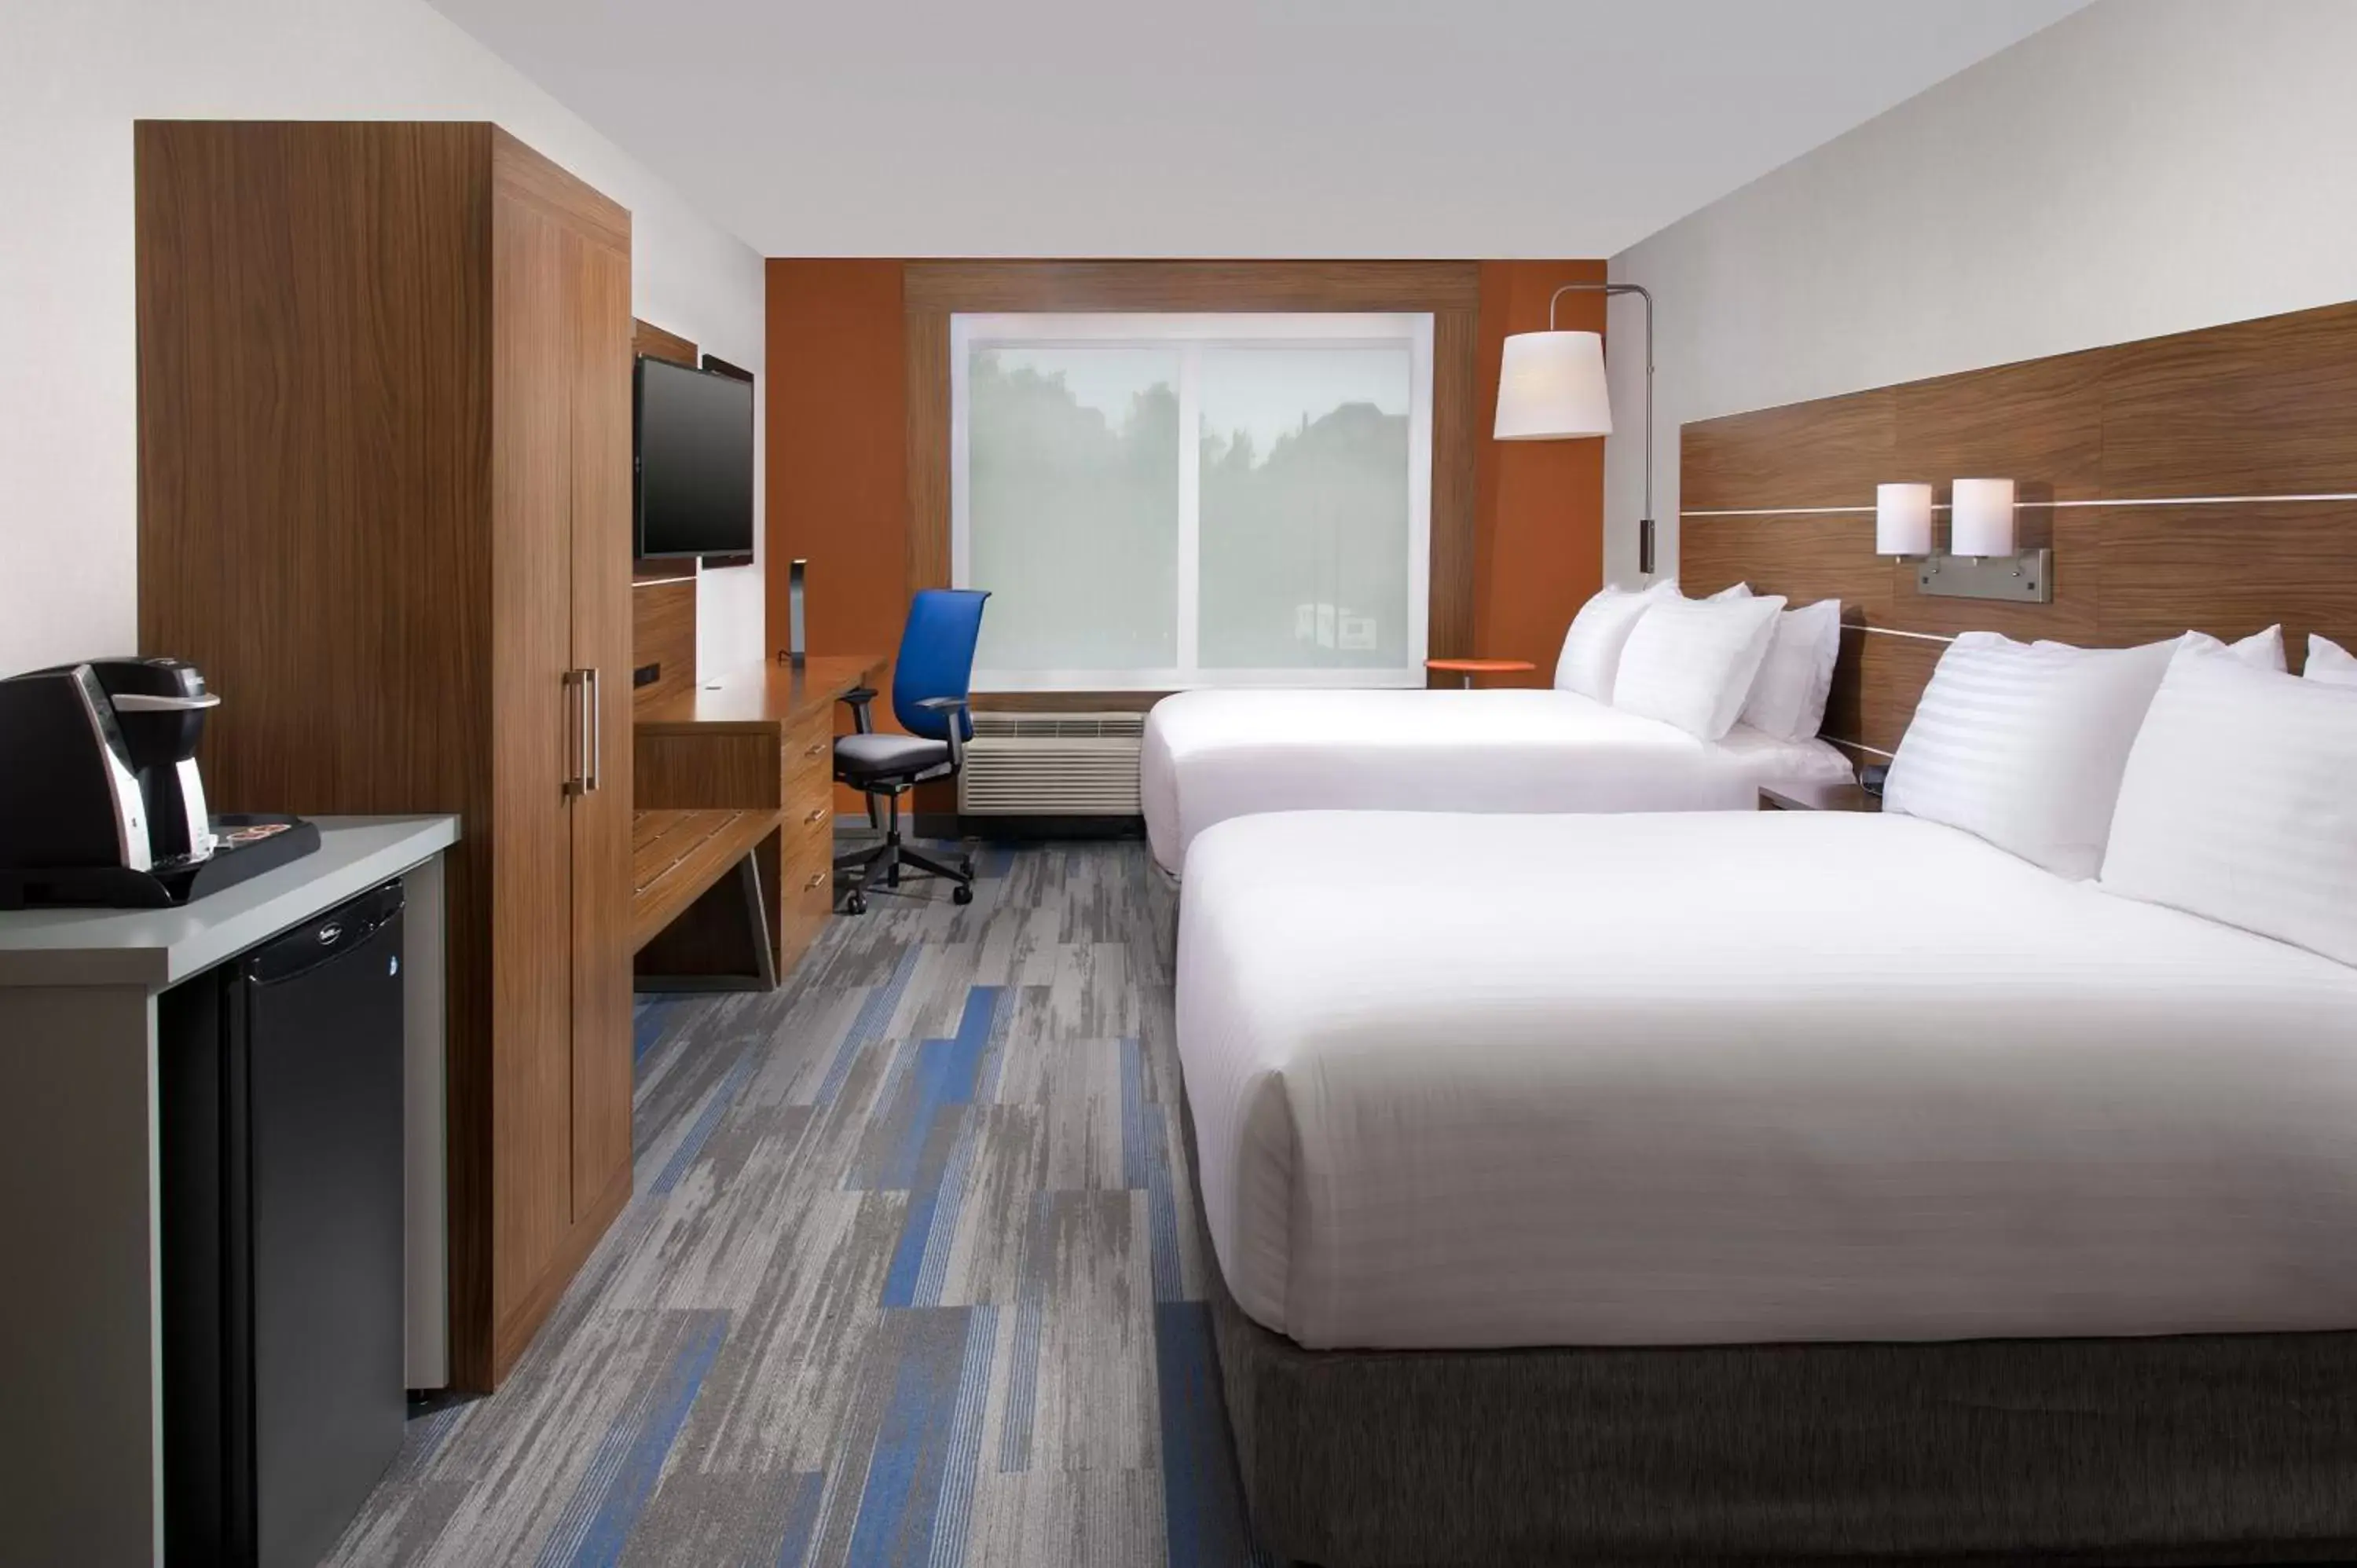 Bedroom, Room Photo in Holiday Inn Express & Suites by IHG Altoona, an IHG Hotel